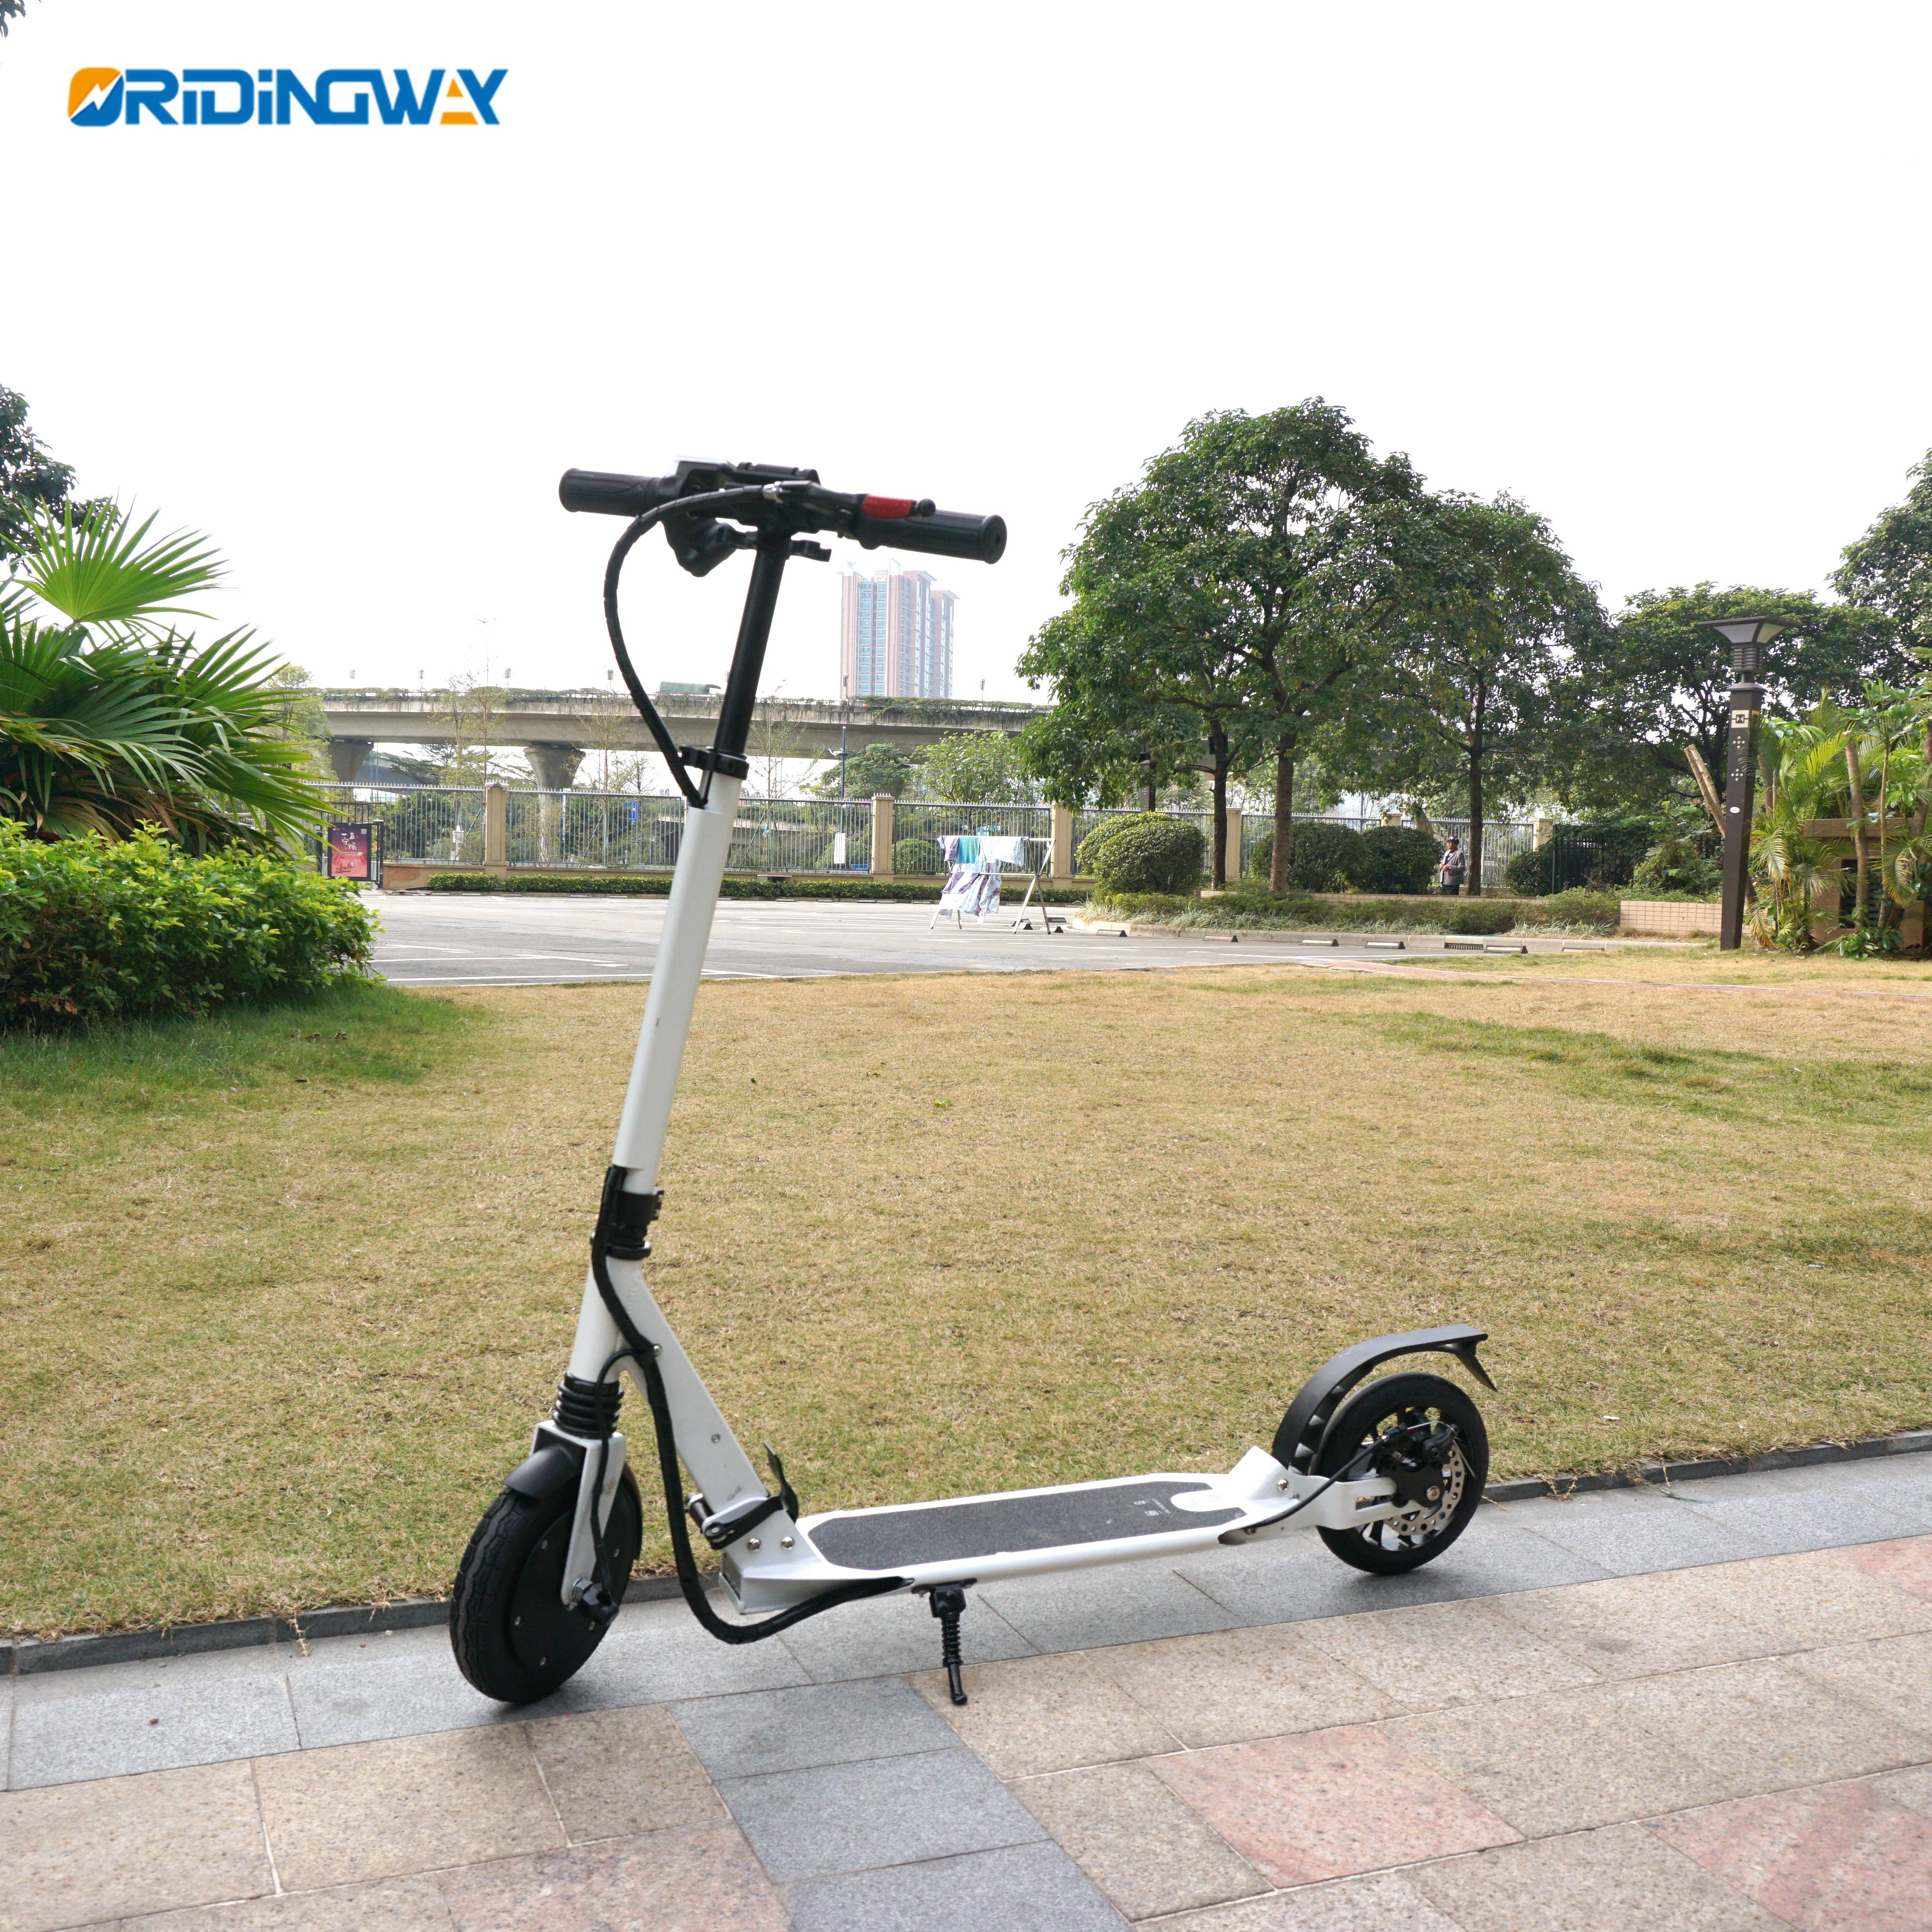 ORIDINGWAY 180w folding electric scooter for kids Featured Image